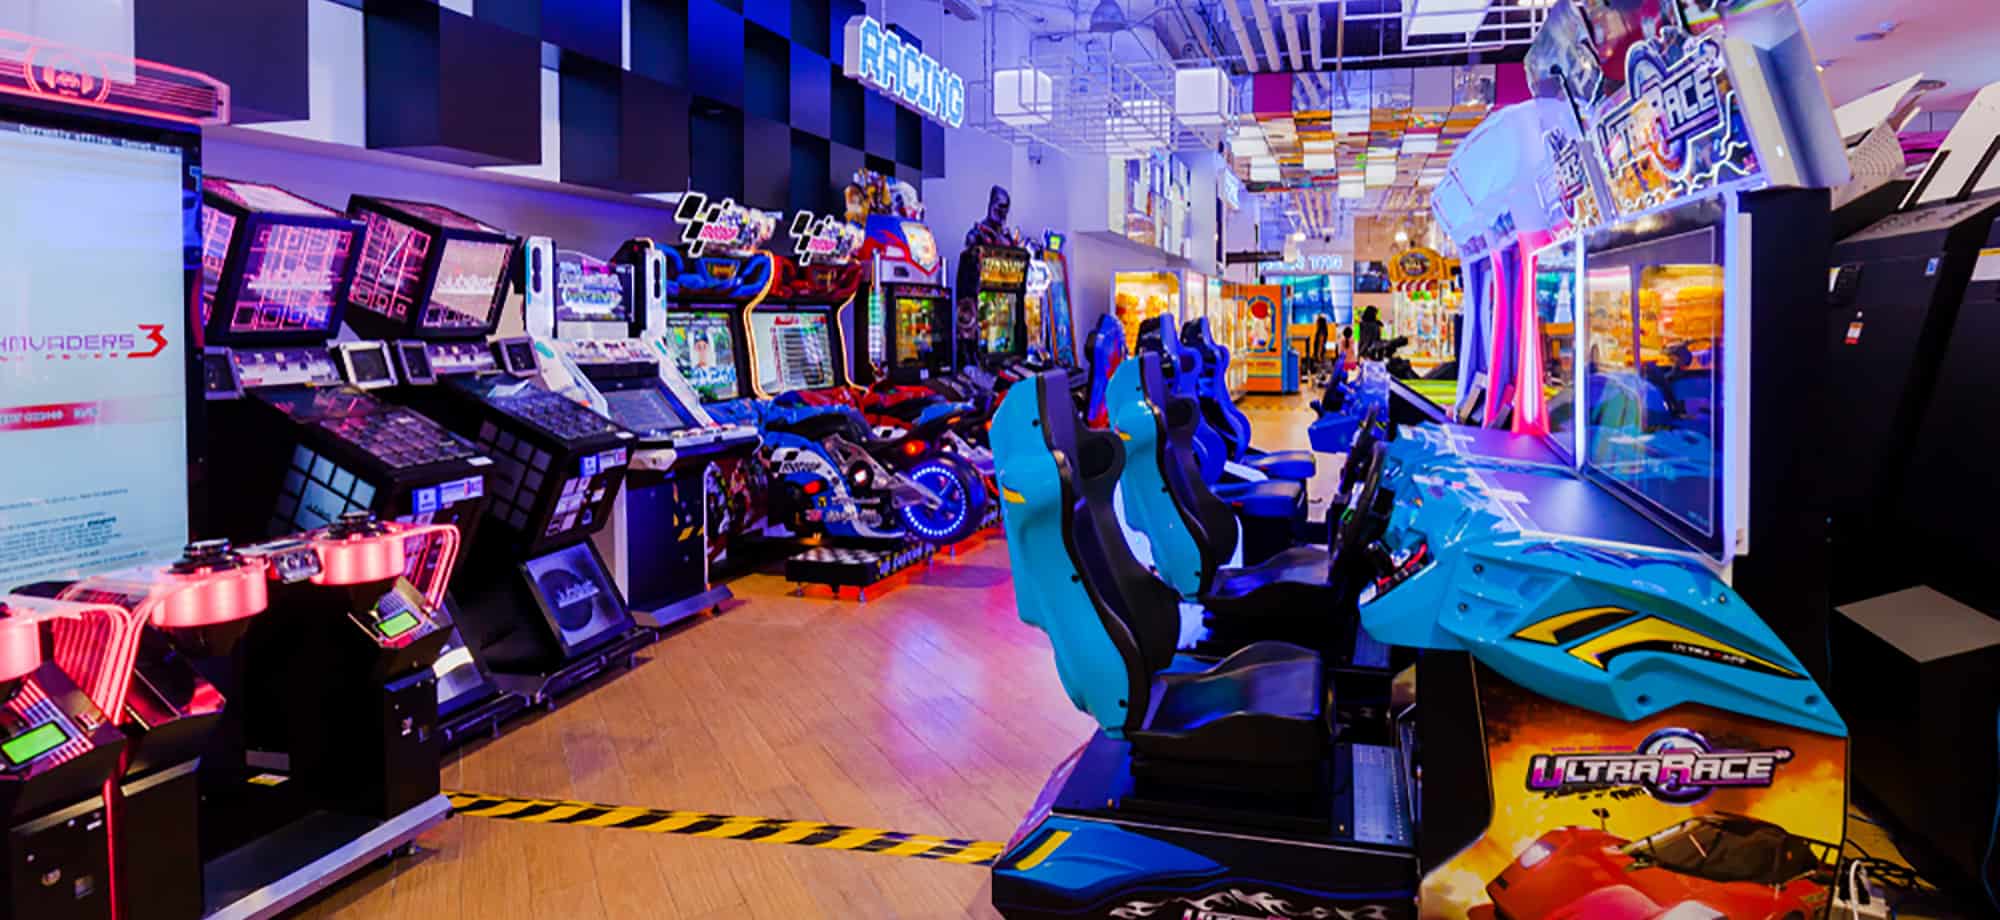 Diamond Leisure Offers a Wide Range of High-Quality Gaming Machines for Rent in Manchester